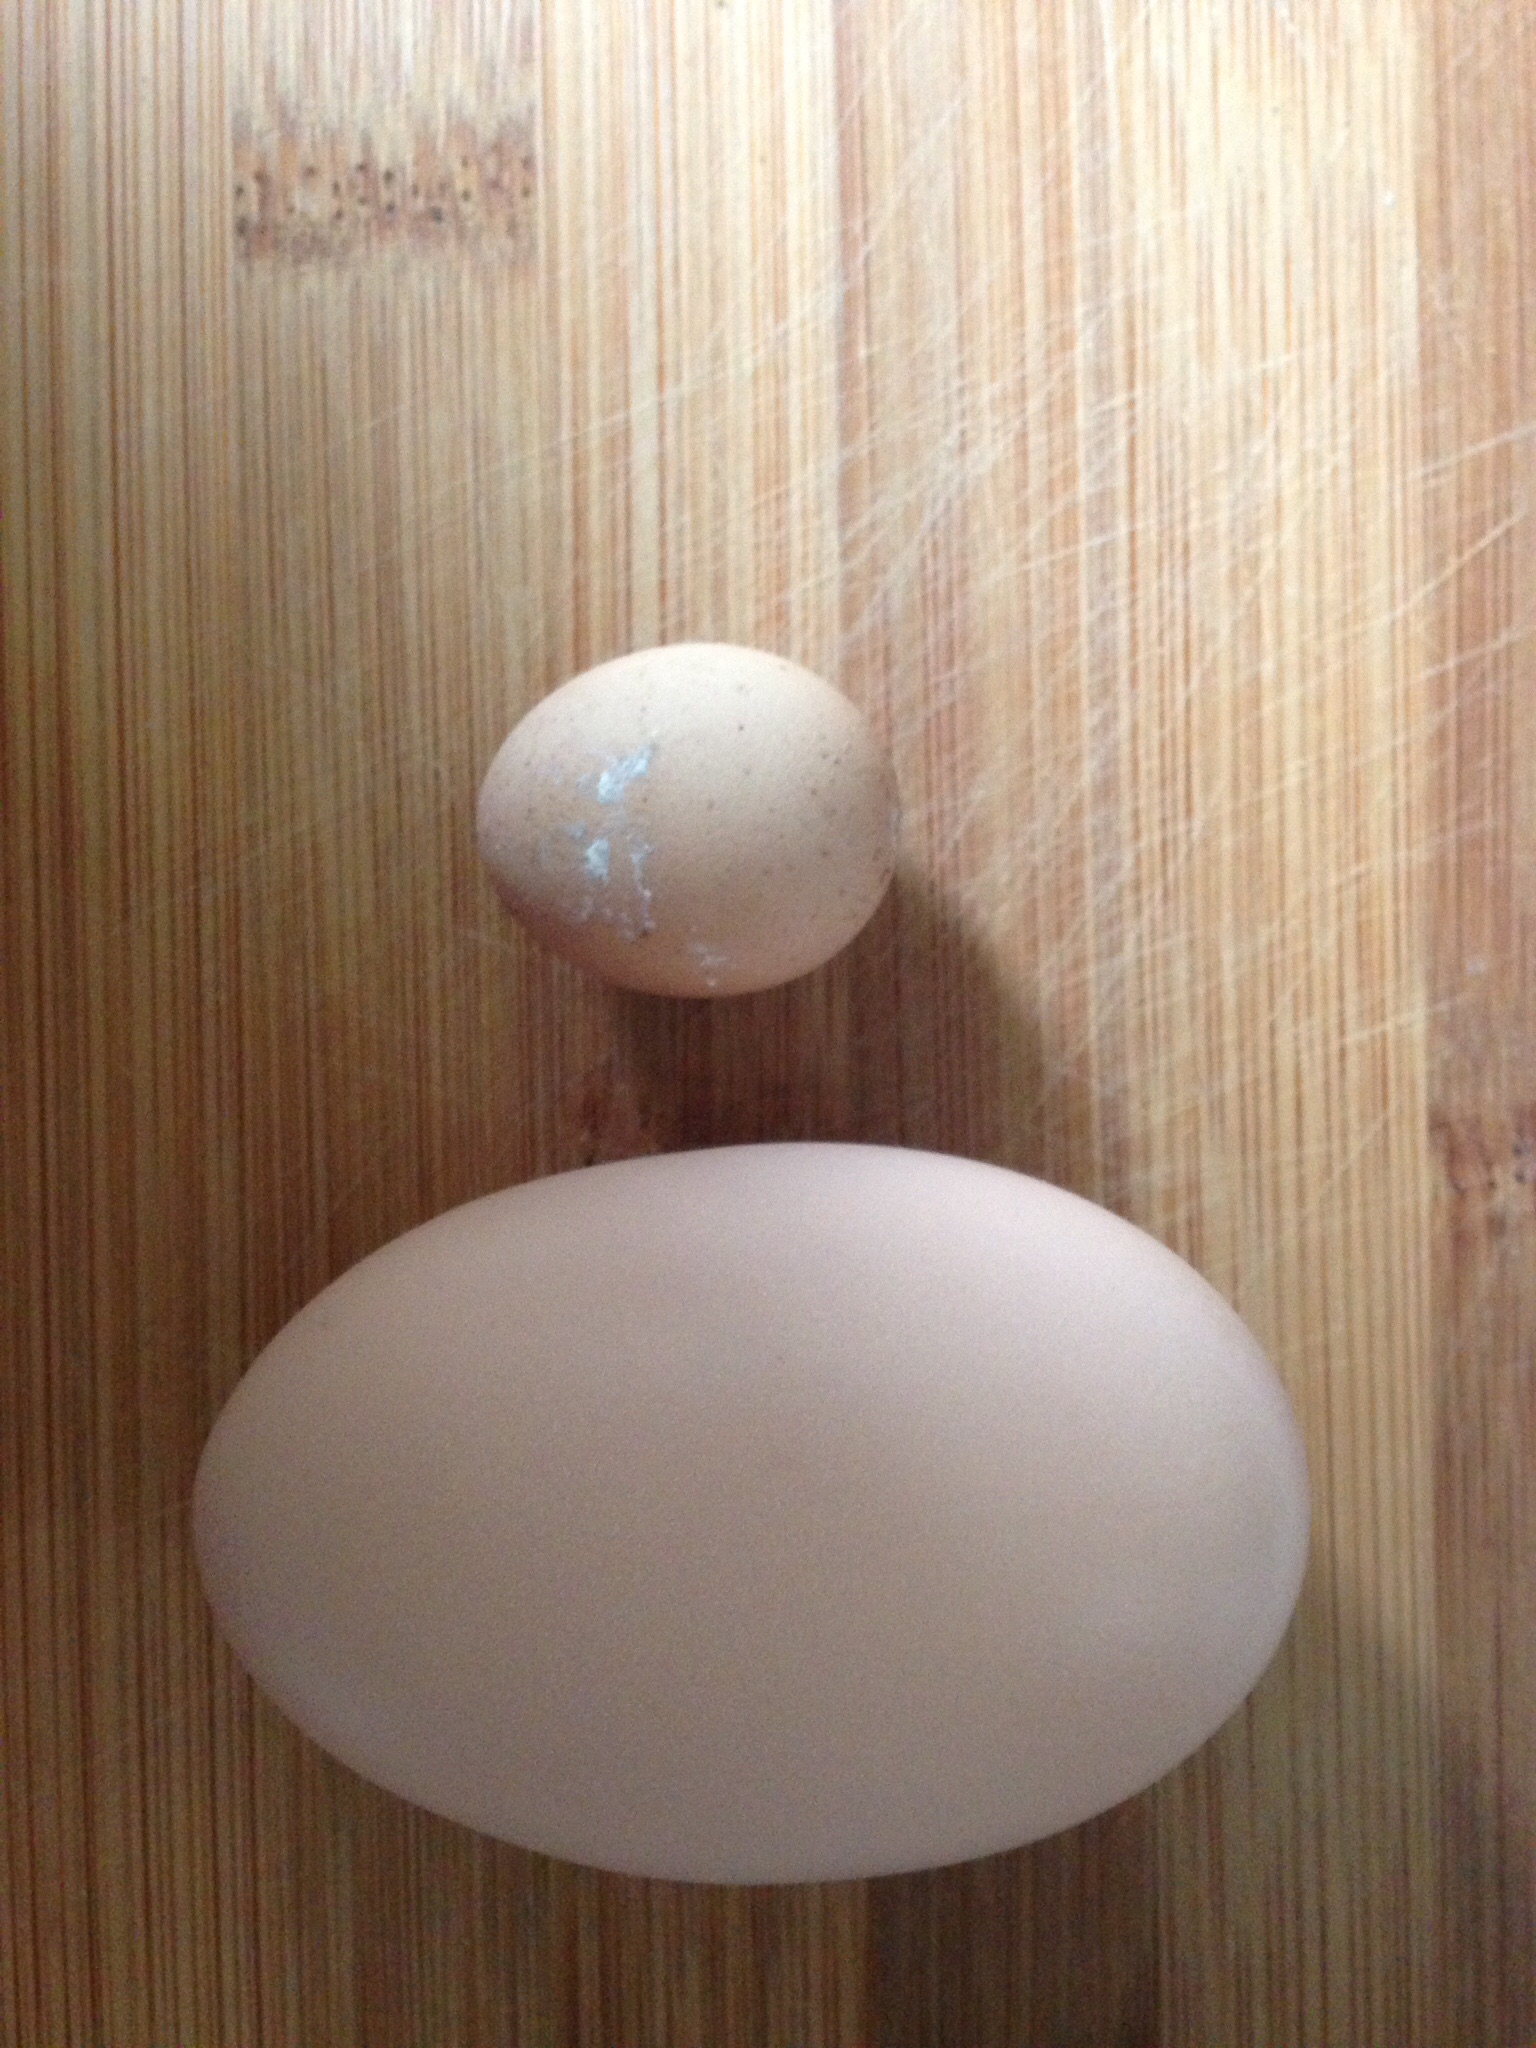 Tiny egg weighing less than 10 grams laid yesterday, next to jumbo egg 70grams laid today.